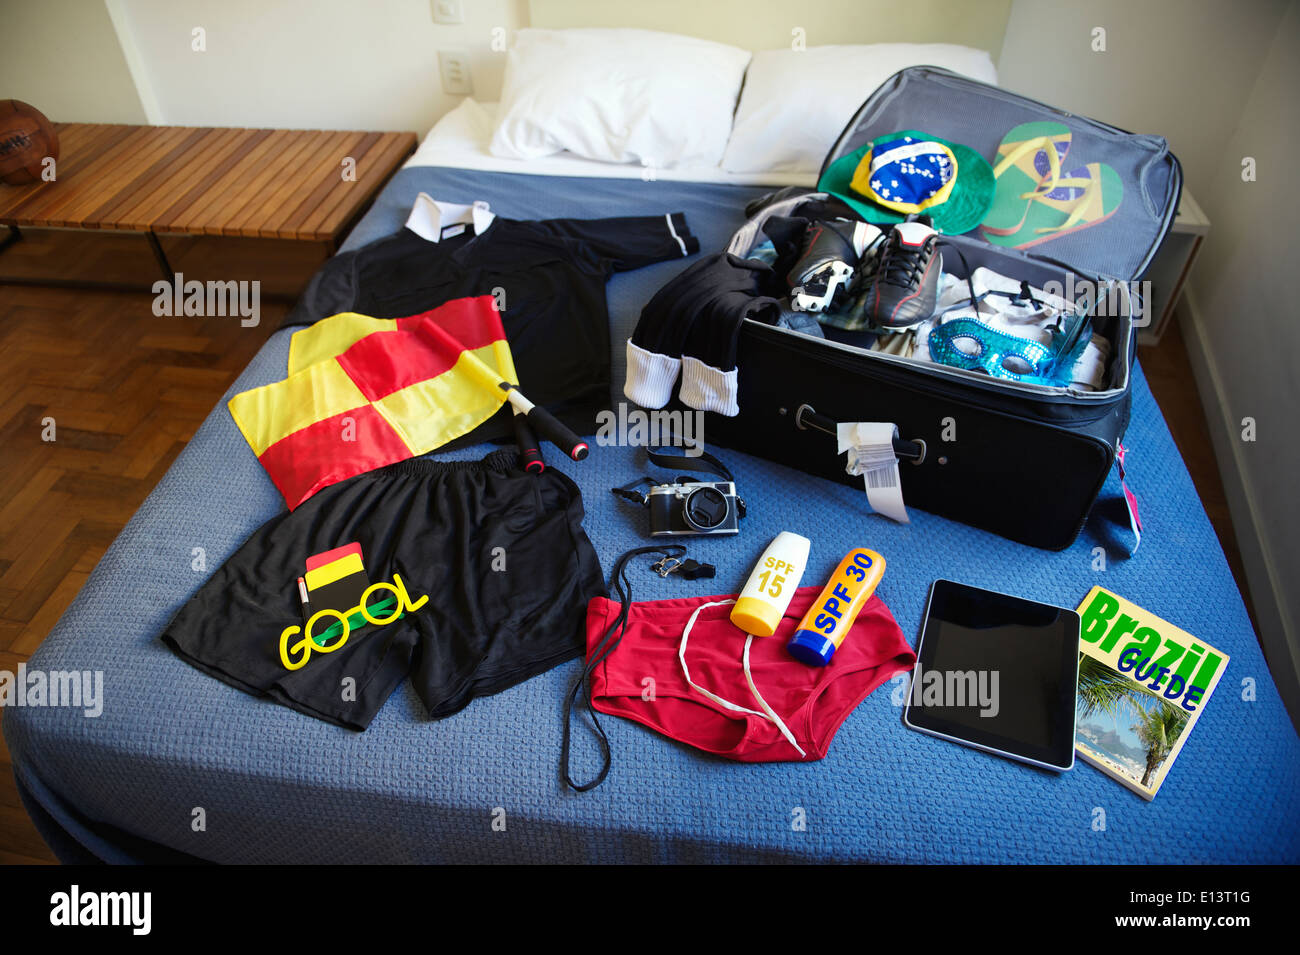 Suitcase packed for football referee trip to Brazil including red and yellow flags, whistle, camera, sunscreen, and guidebook Stock Photo